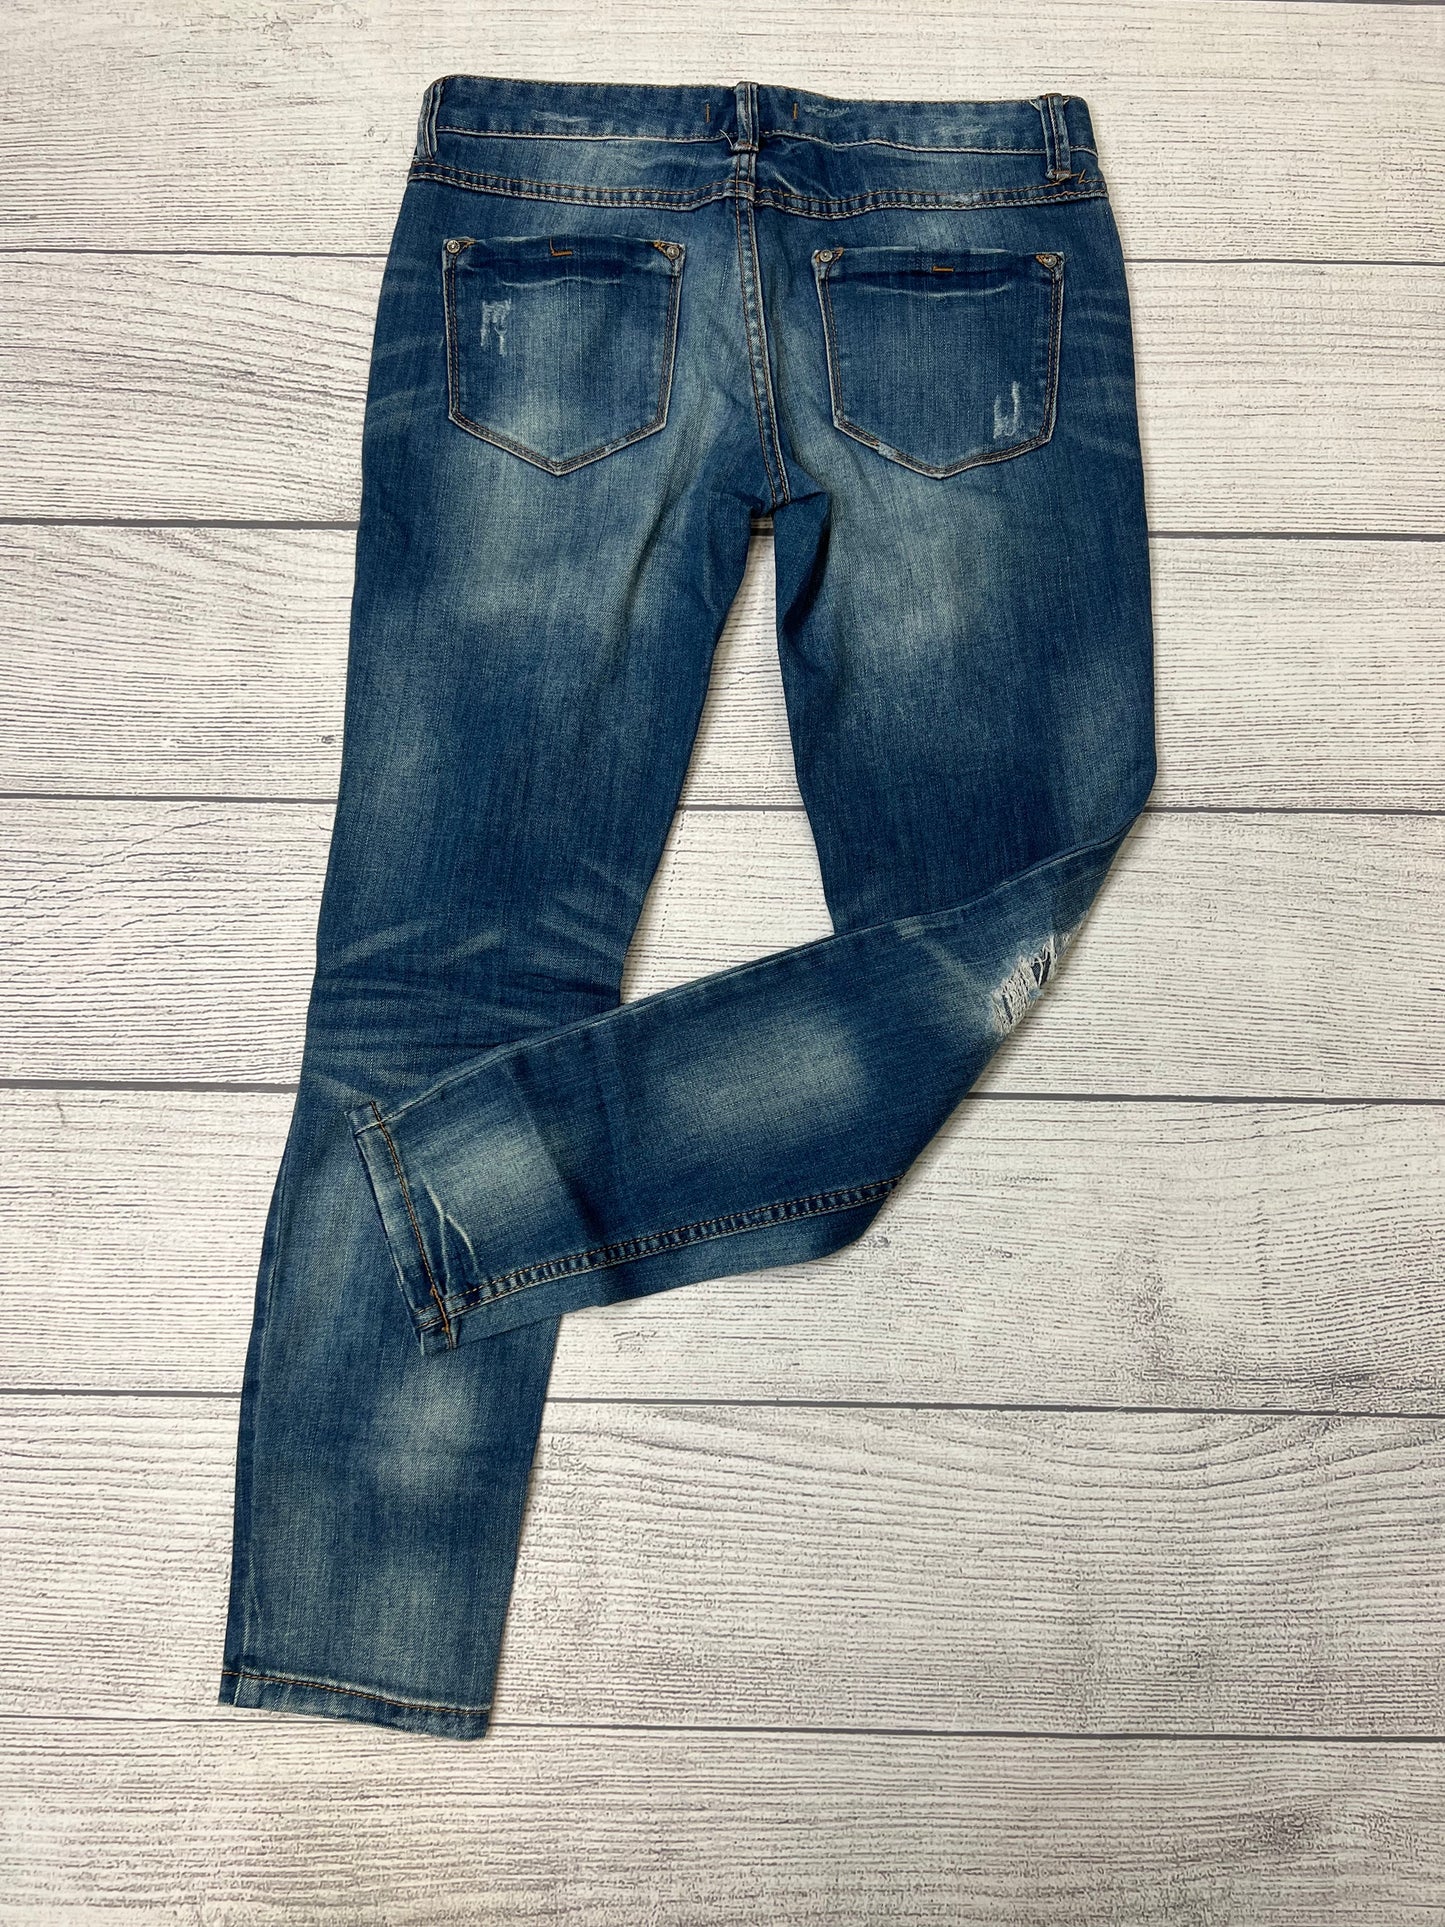 Jeans Skinny By Free People  Size: 4